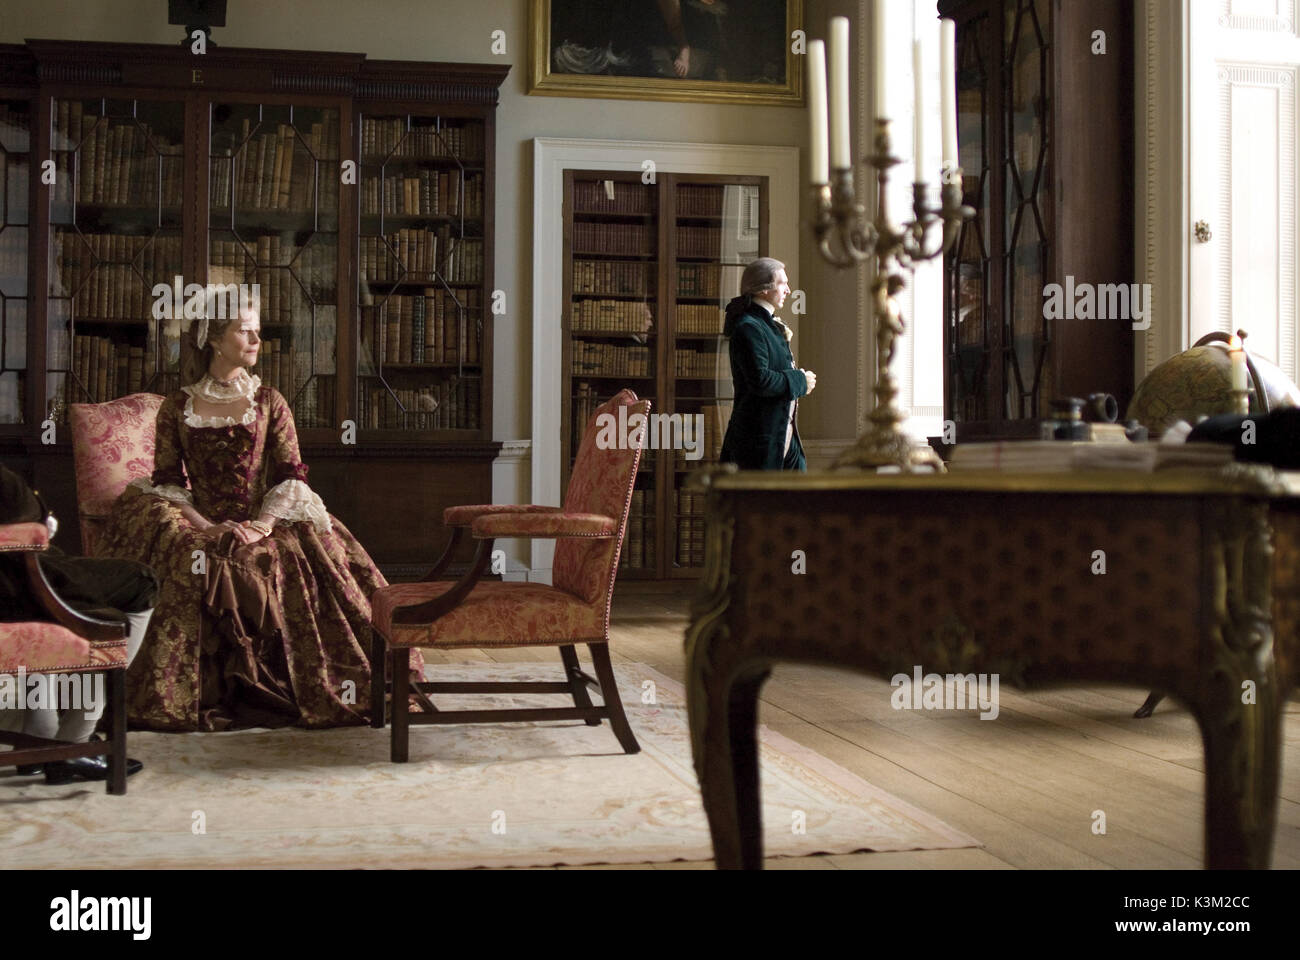 THE DUCHESS CHARLOTTE RAMPLING as Lady Spencer, RALPH FIENNES as the Duke of Devonshire       Date: 2008 Stock Photo